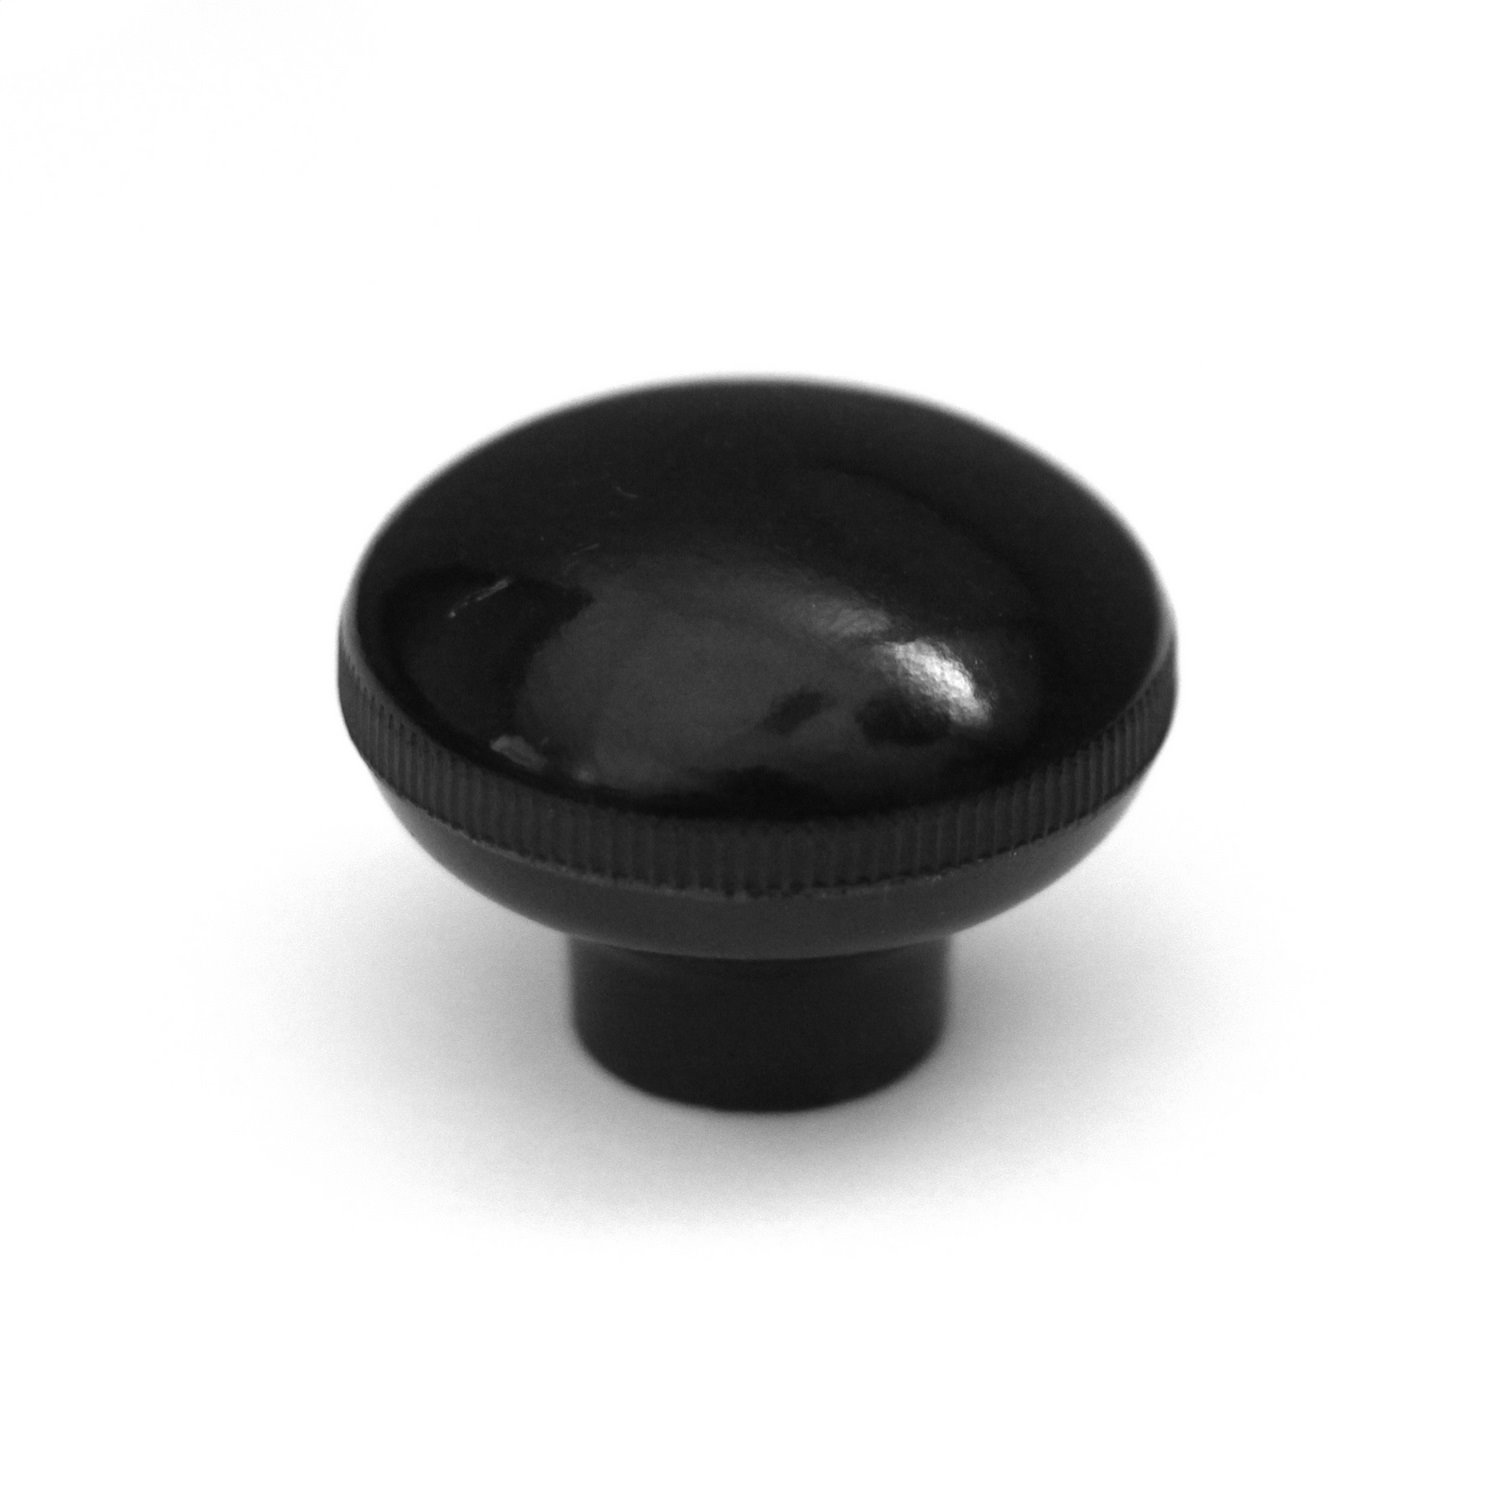 Replacement shift knob from Omix-ADA, Fits 67-75 Jeep vehicles with T90 T14 and T15 transmissions.